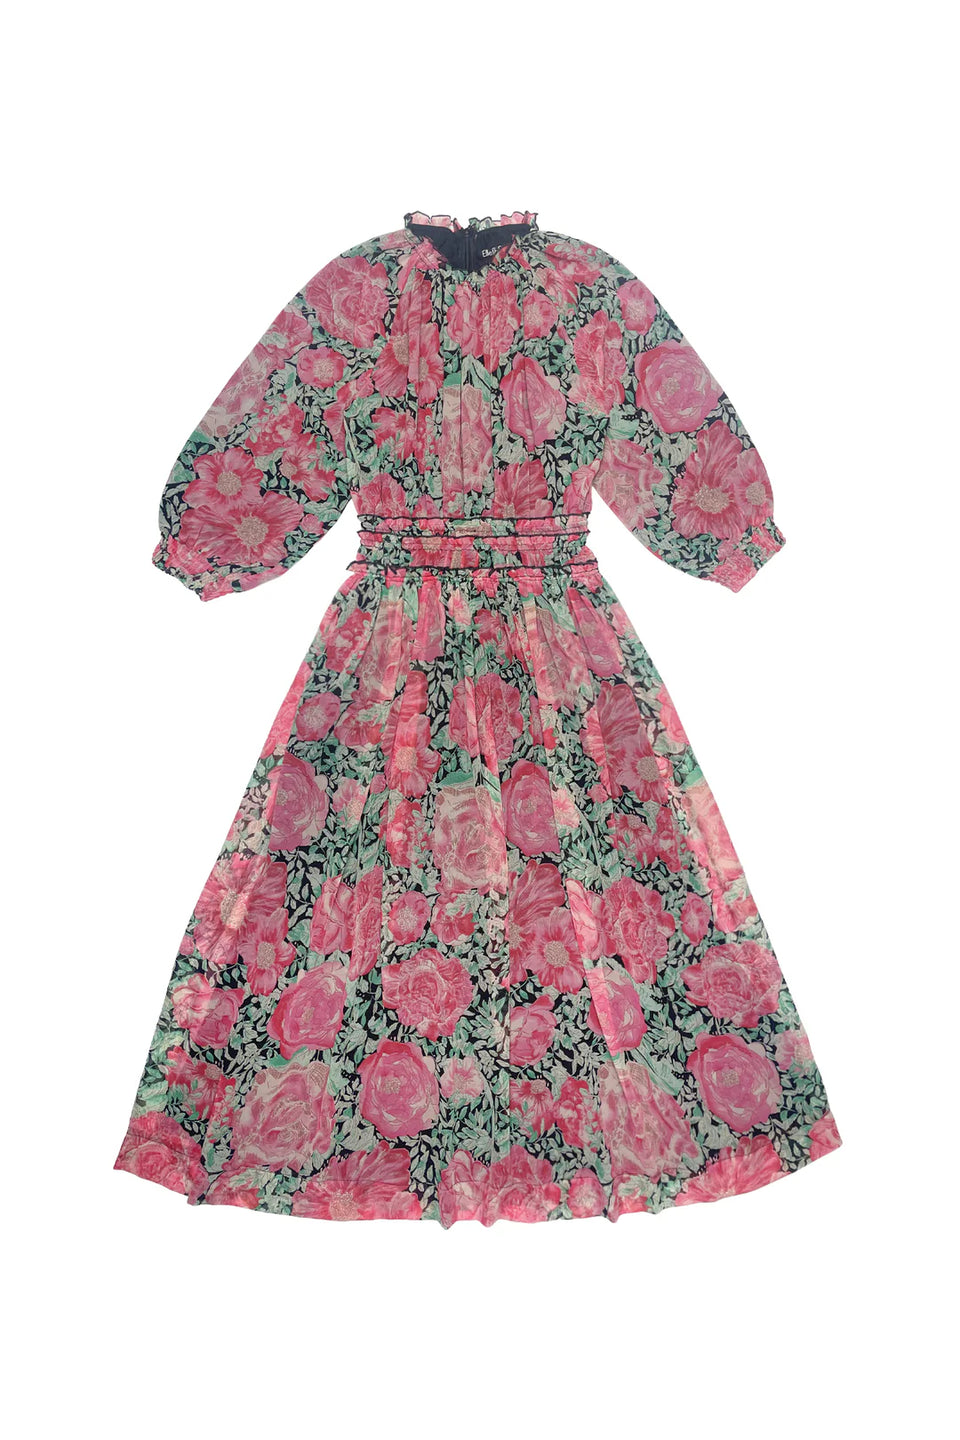 Elle Oh Elle Pink & Green Floral Dress with Cinched Waist